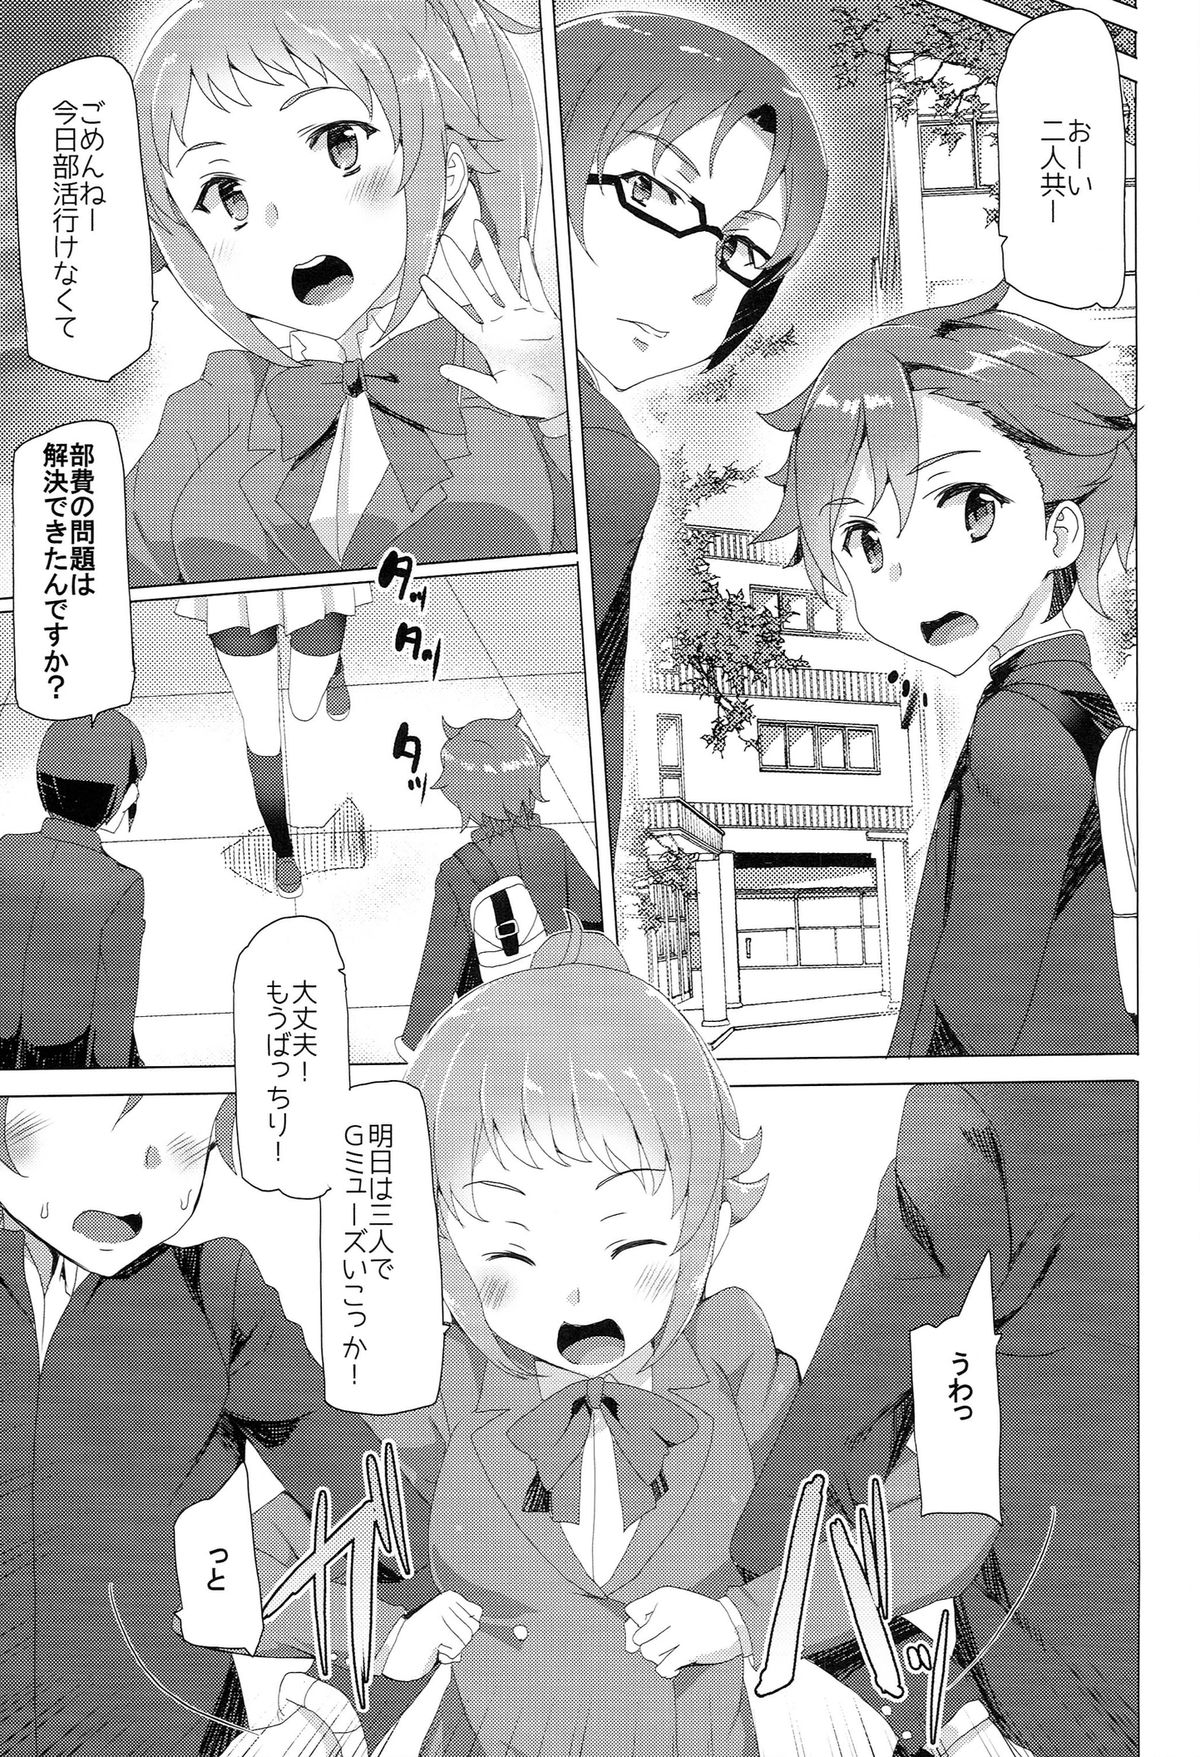 [Waffle Doumeiken (Tanaka Decilitre)] Yariman Bitch Fighters (Gundam Build Fighters Try) page 29 full